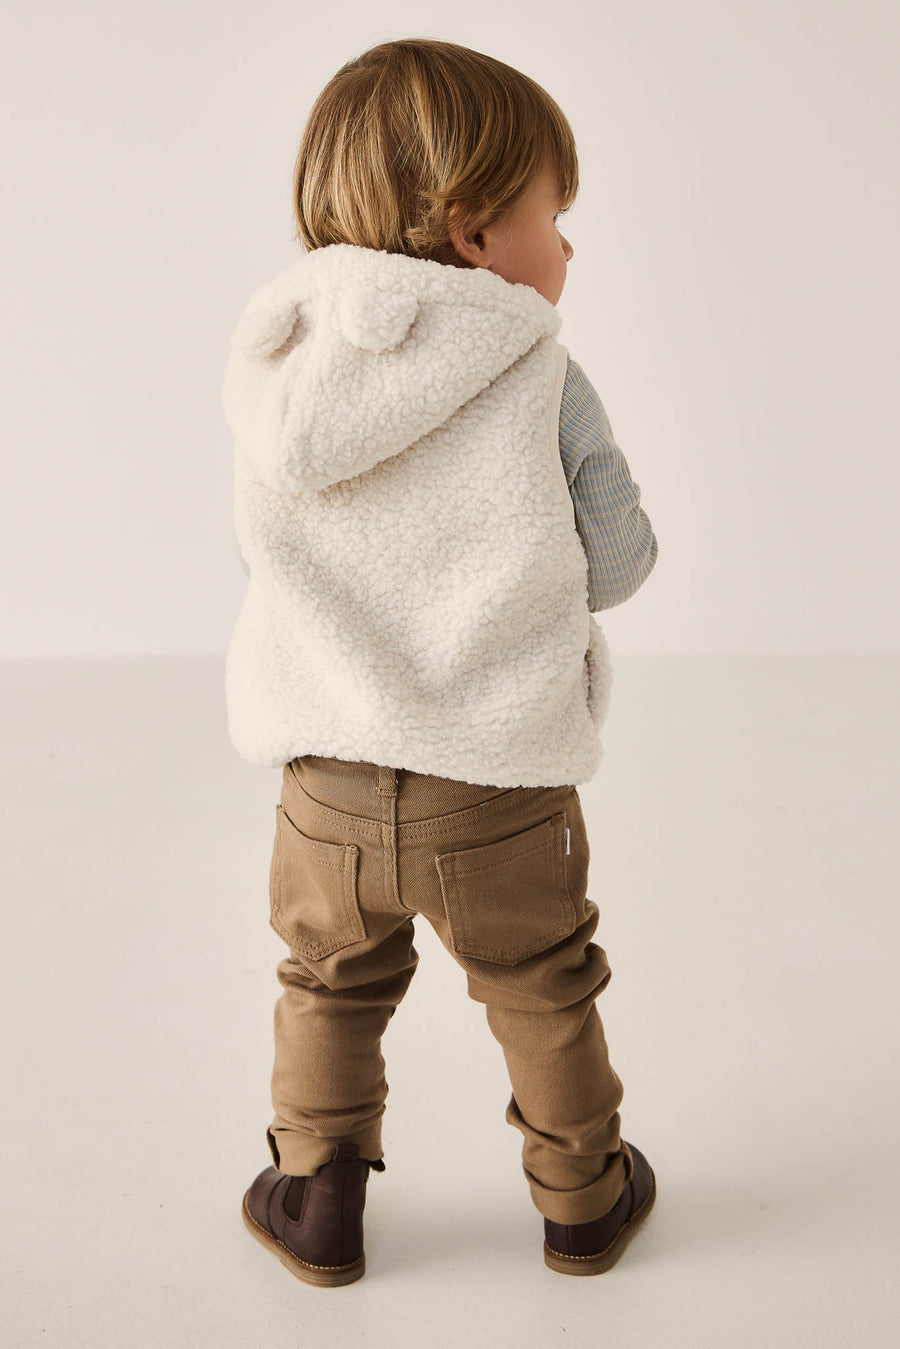 Austin Woven Pant - Wheat Childrens Pant from Jamie Kay NZ